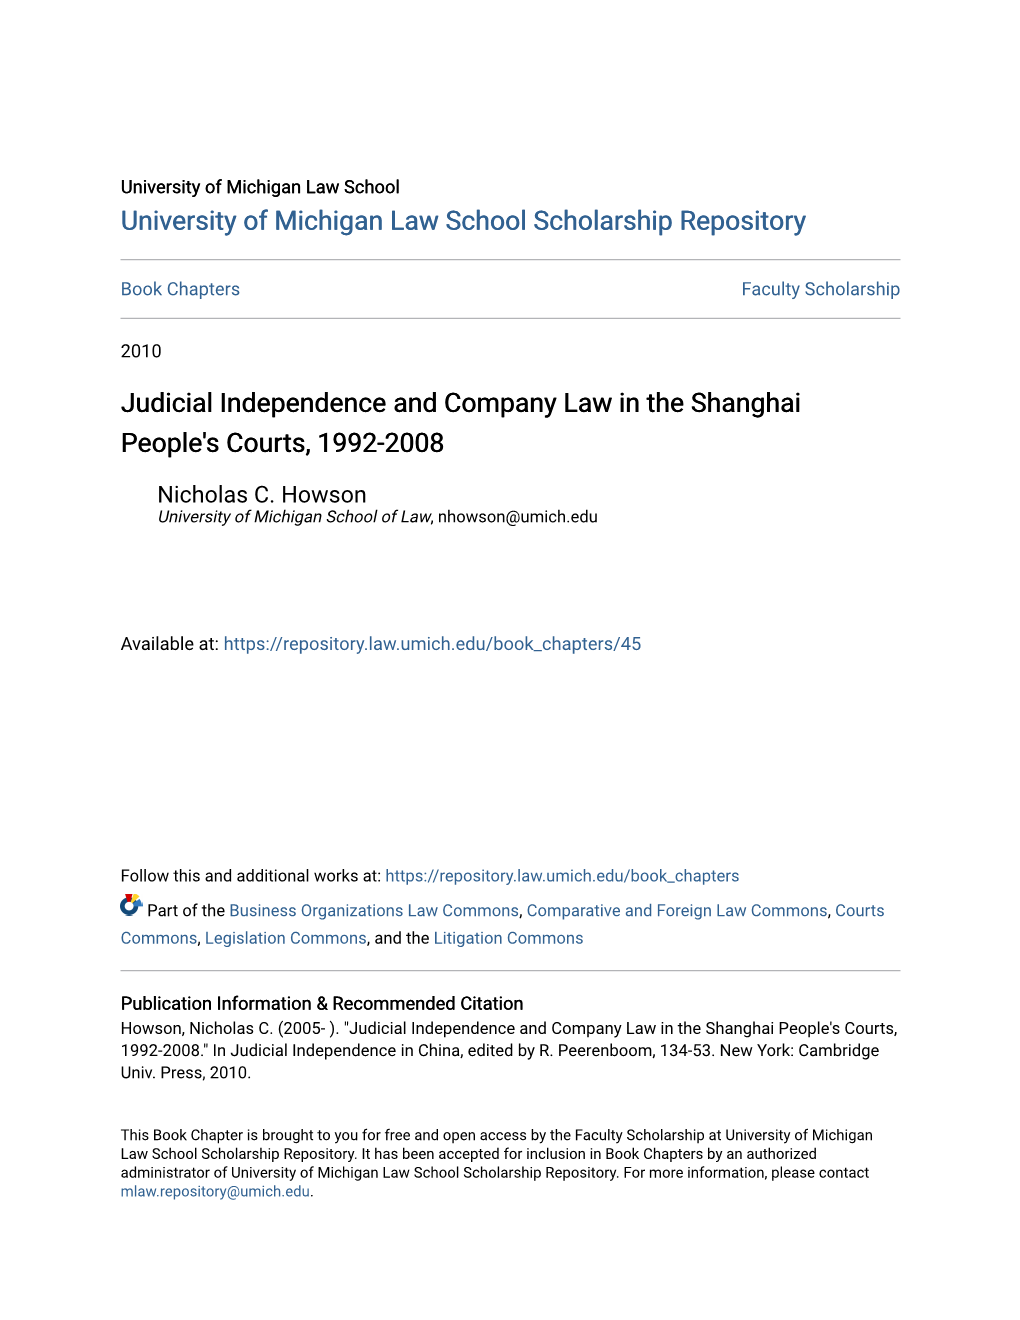 Judicial Independence and Company Law in the Shanghai People's Courts, 1992-2008